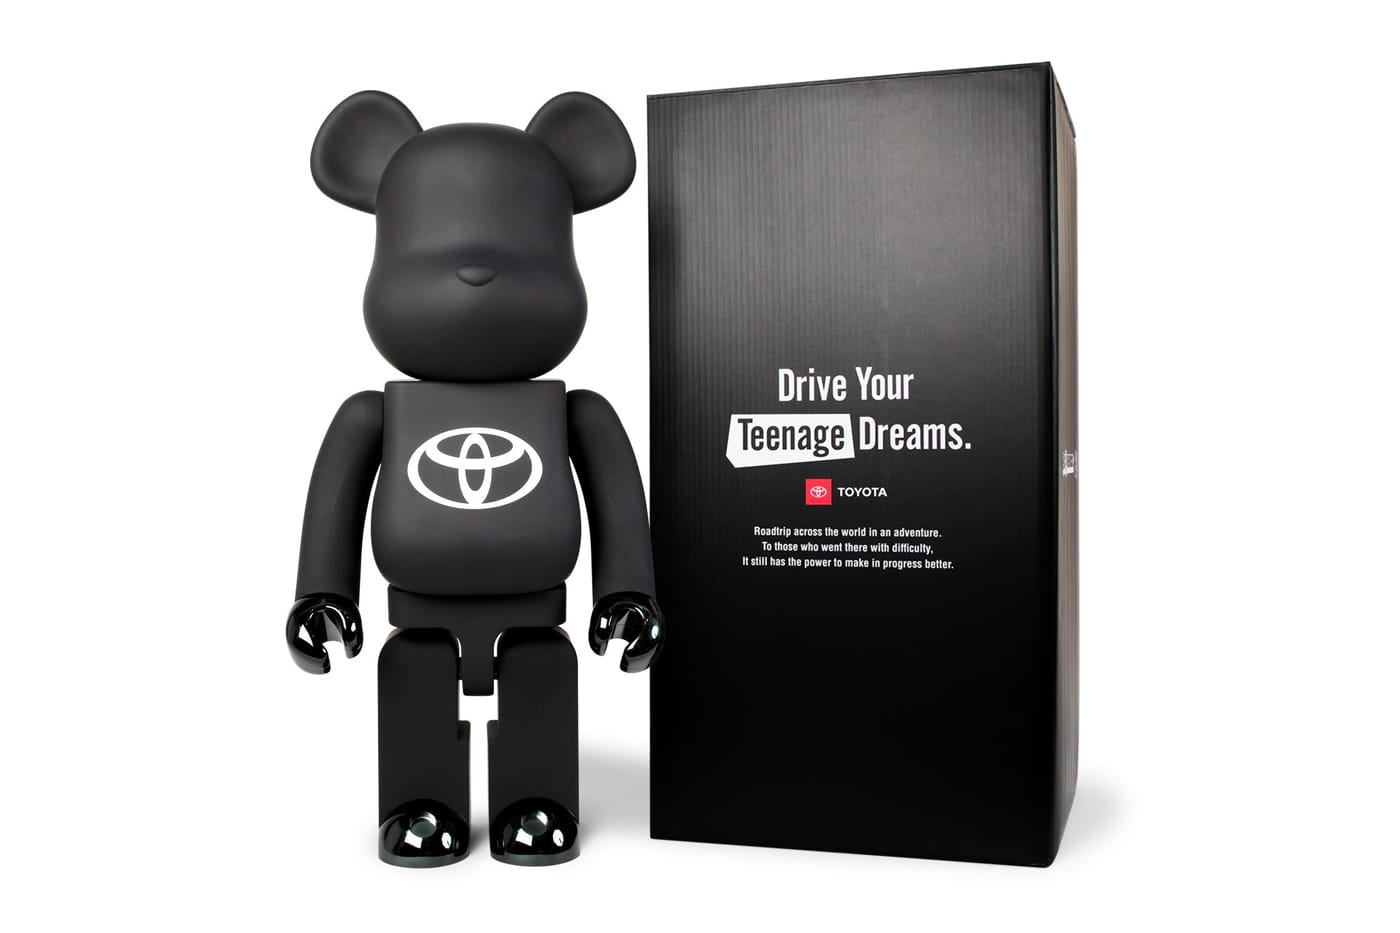 BE@RBRICK TOYOTA 1000% ベアブリックキャラクターグッズ